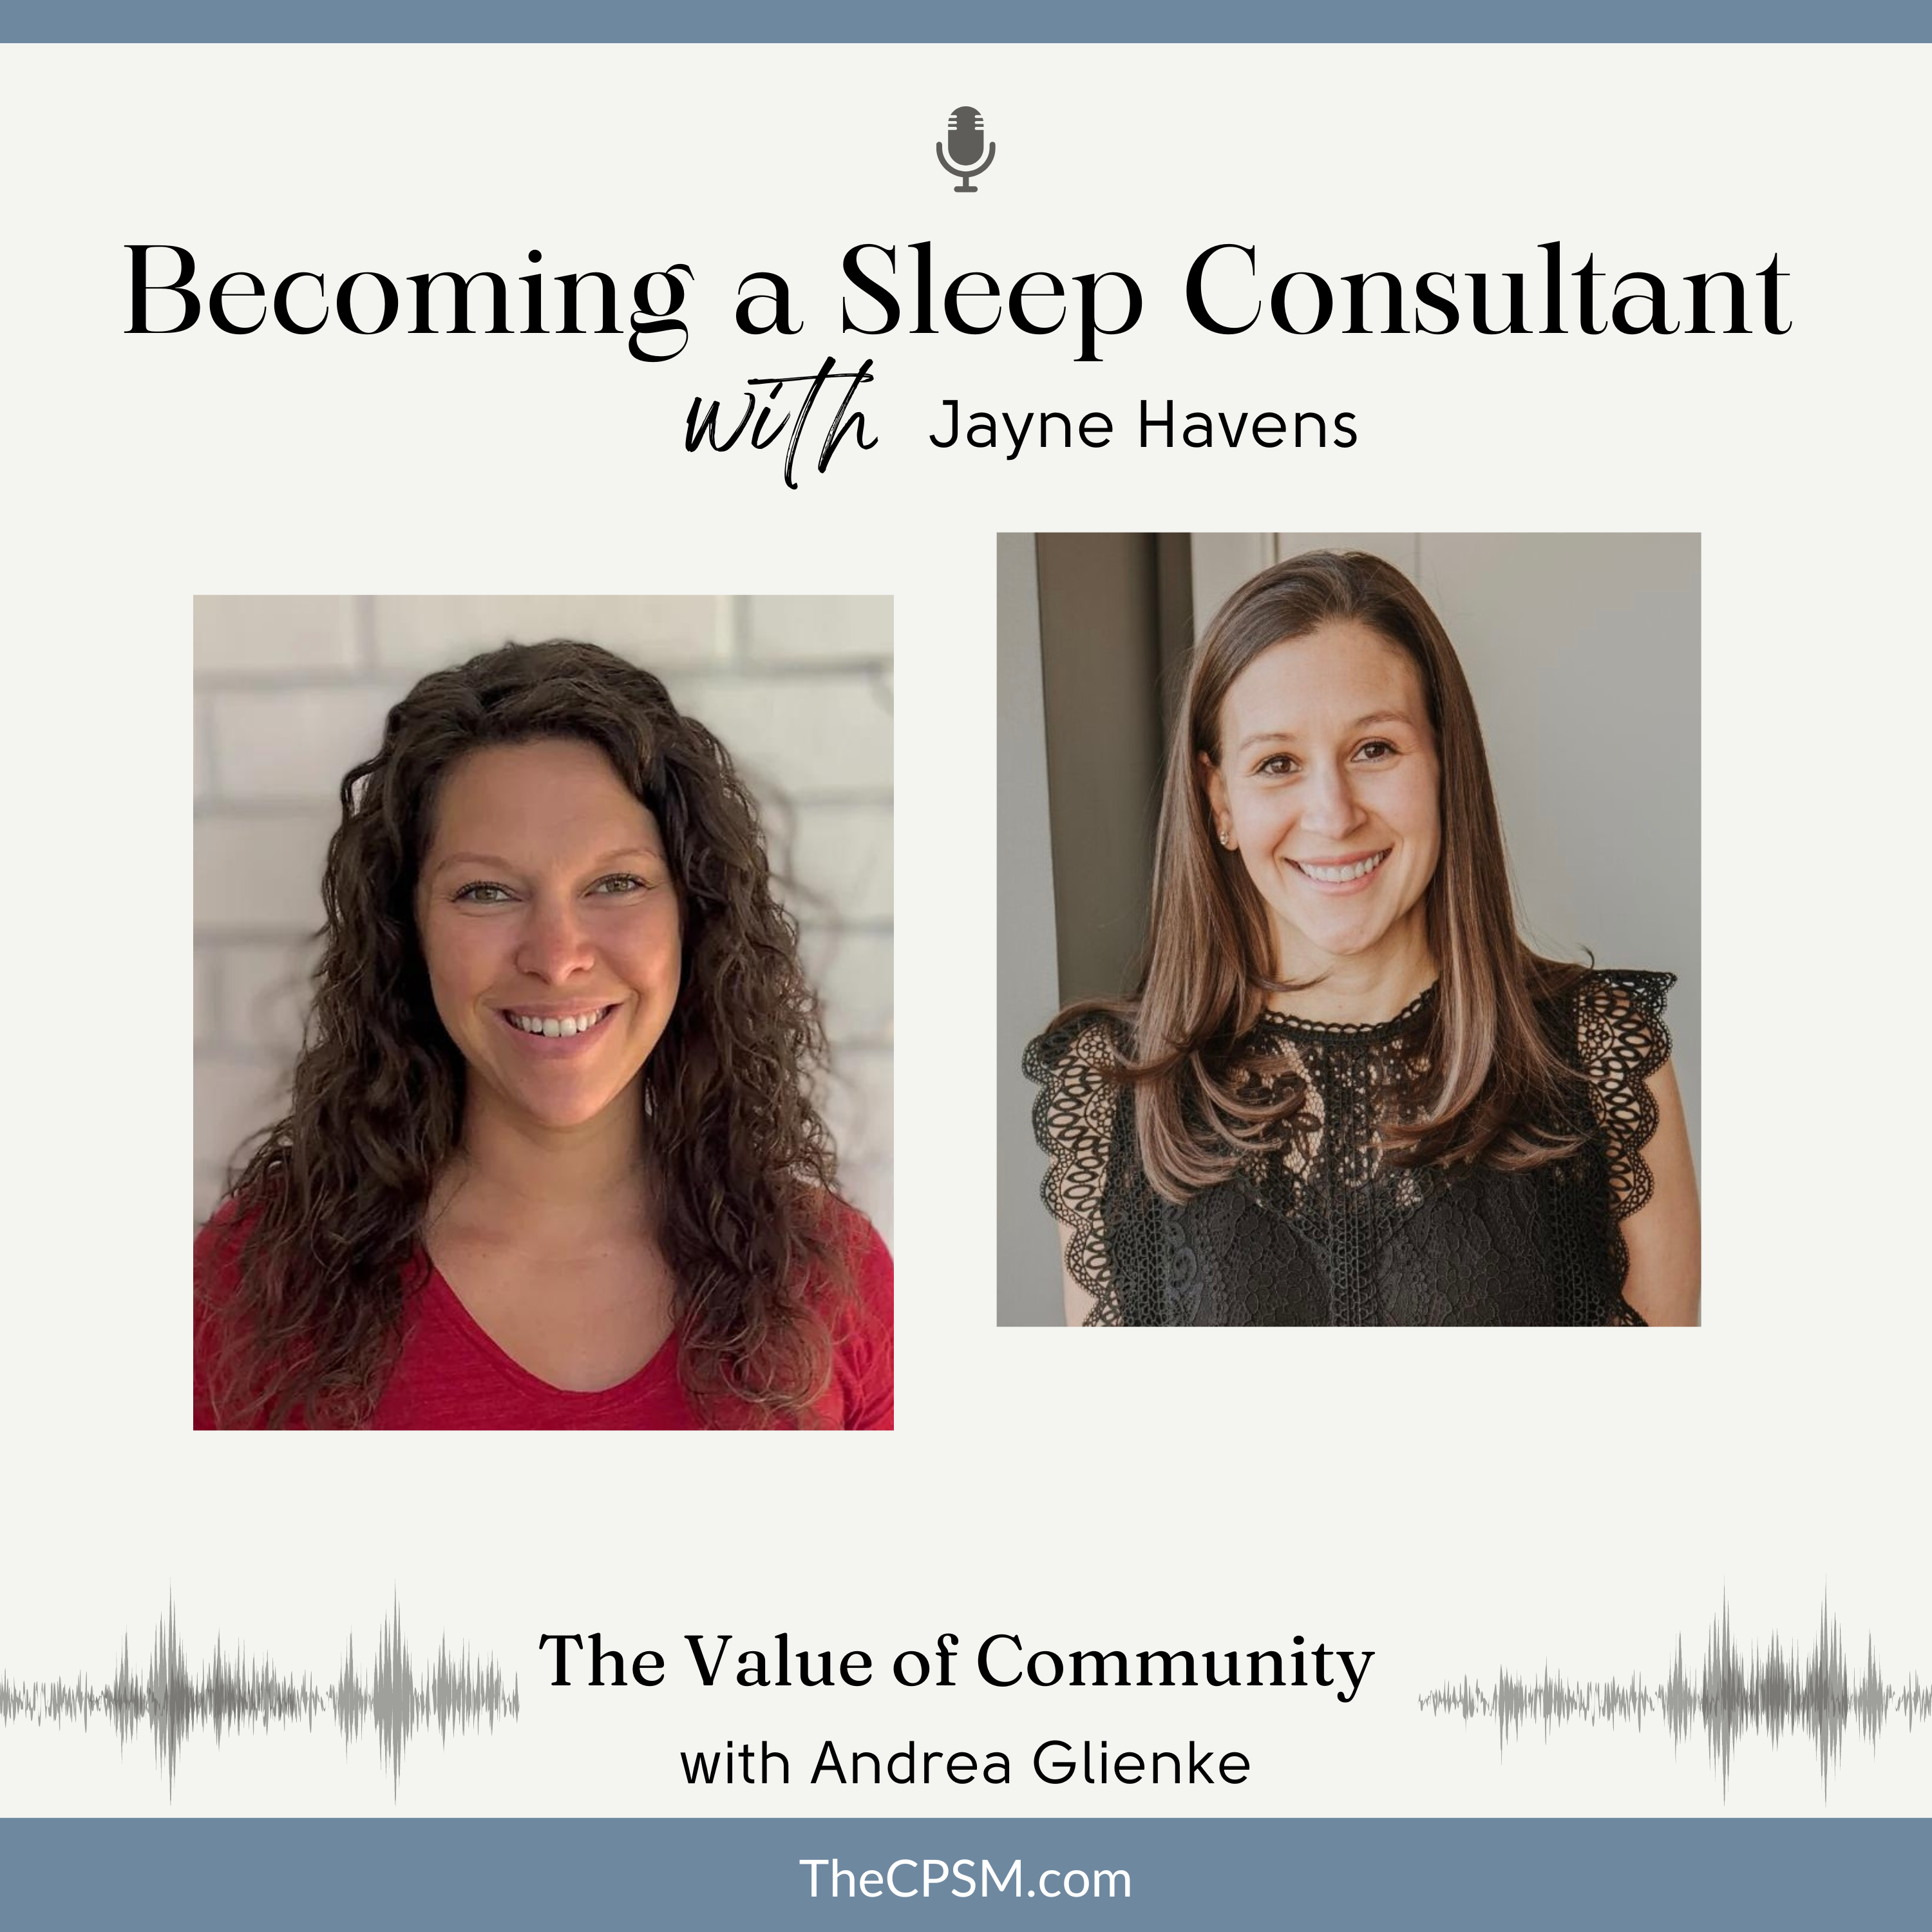 The Value of Community with Andrea Glienke